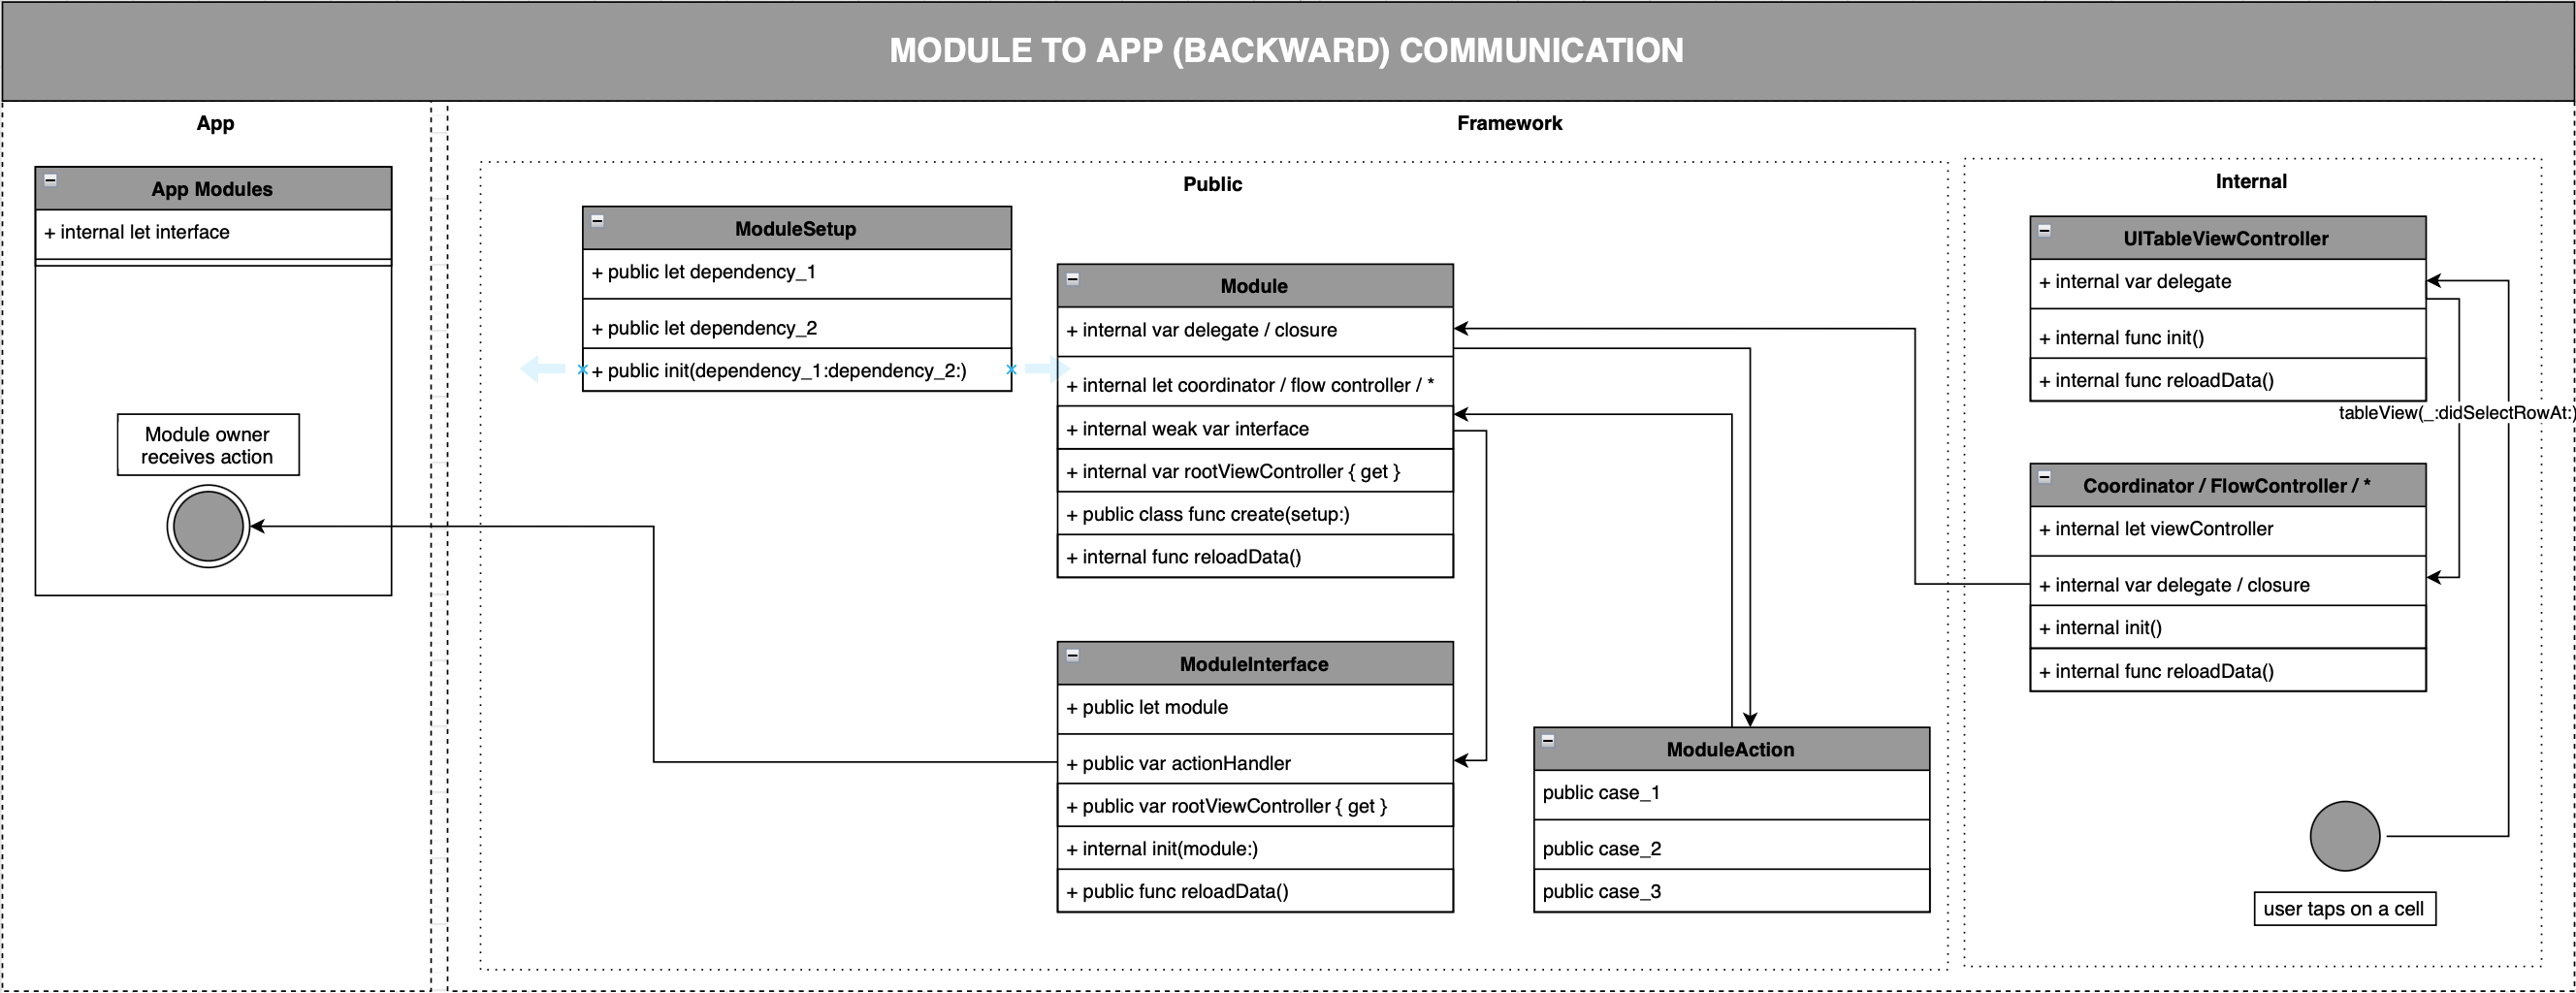 From Module To App Communication